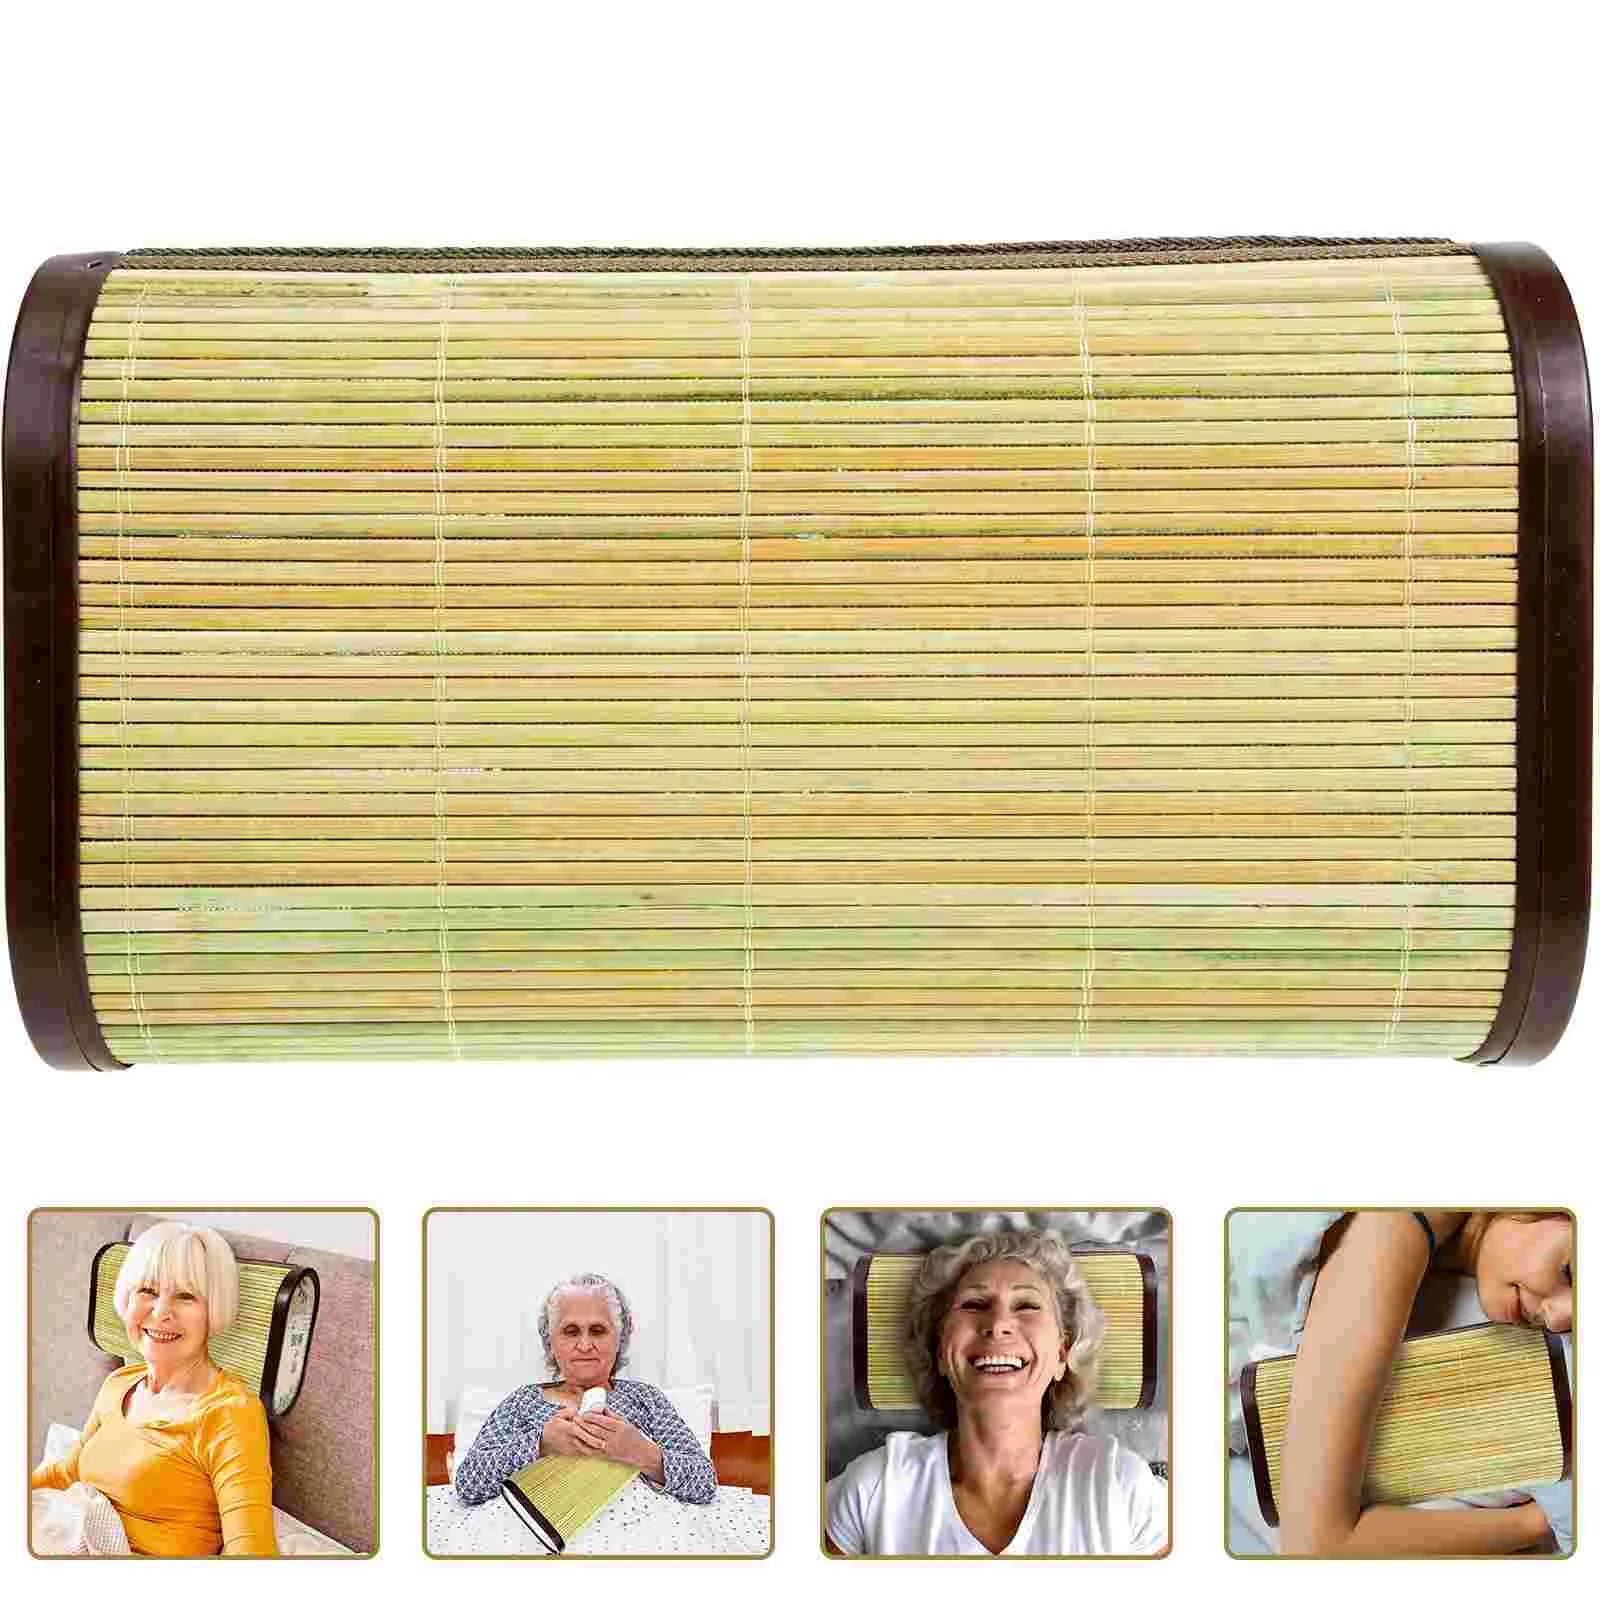 

Pillow Sauna Neck Headrest Room Steam Spa Wooden Rest Breathable Sweat Accessories Wood Woven Support Therapeutic Stiff